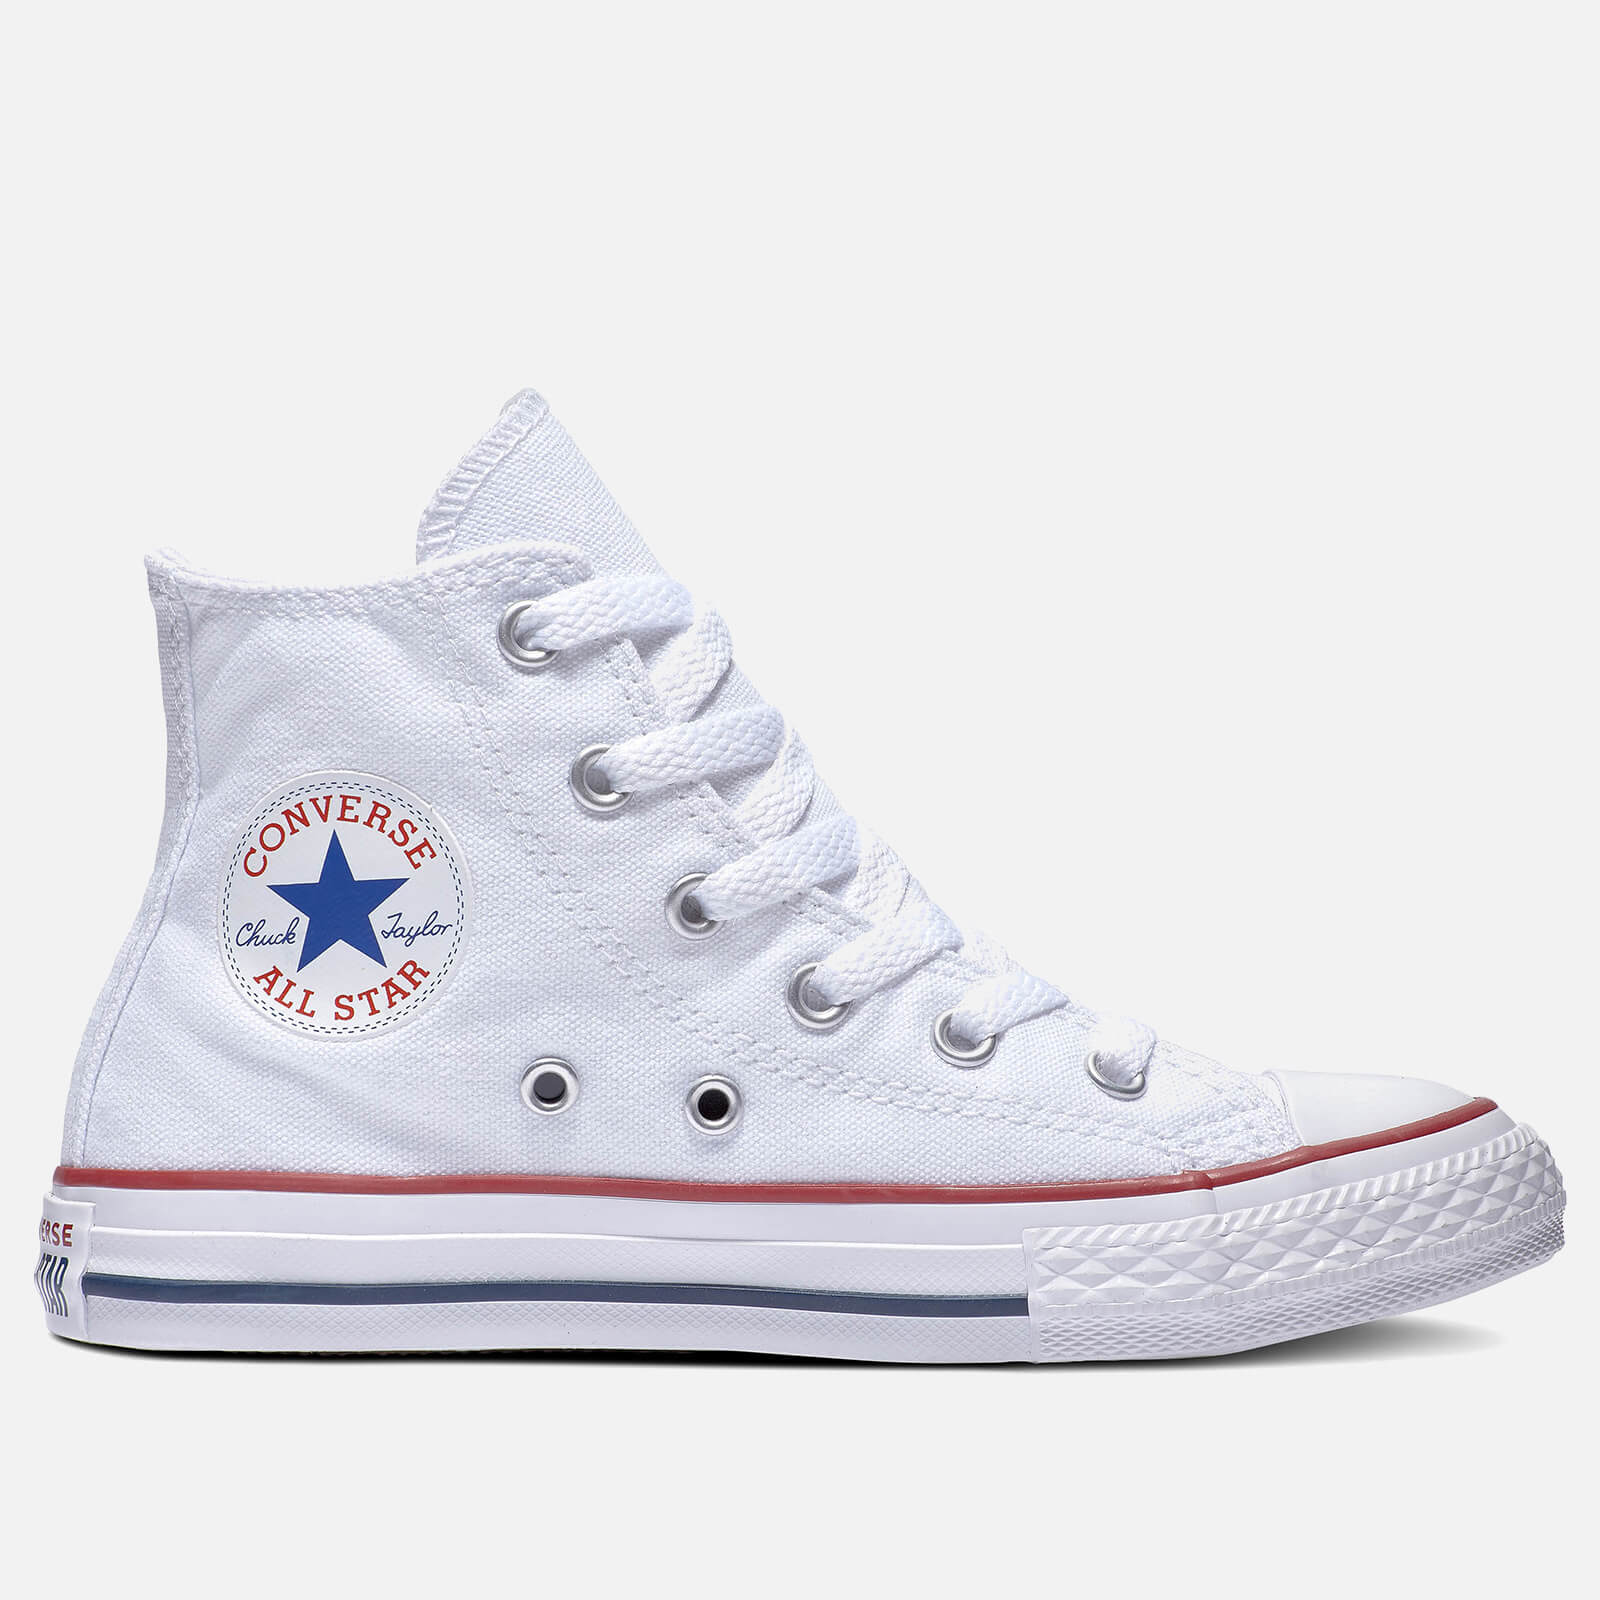 Converse Kids' Chuck Taylor All Star Hi - Top Tainers - Optical White - UK 2 Kids